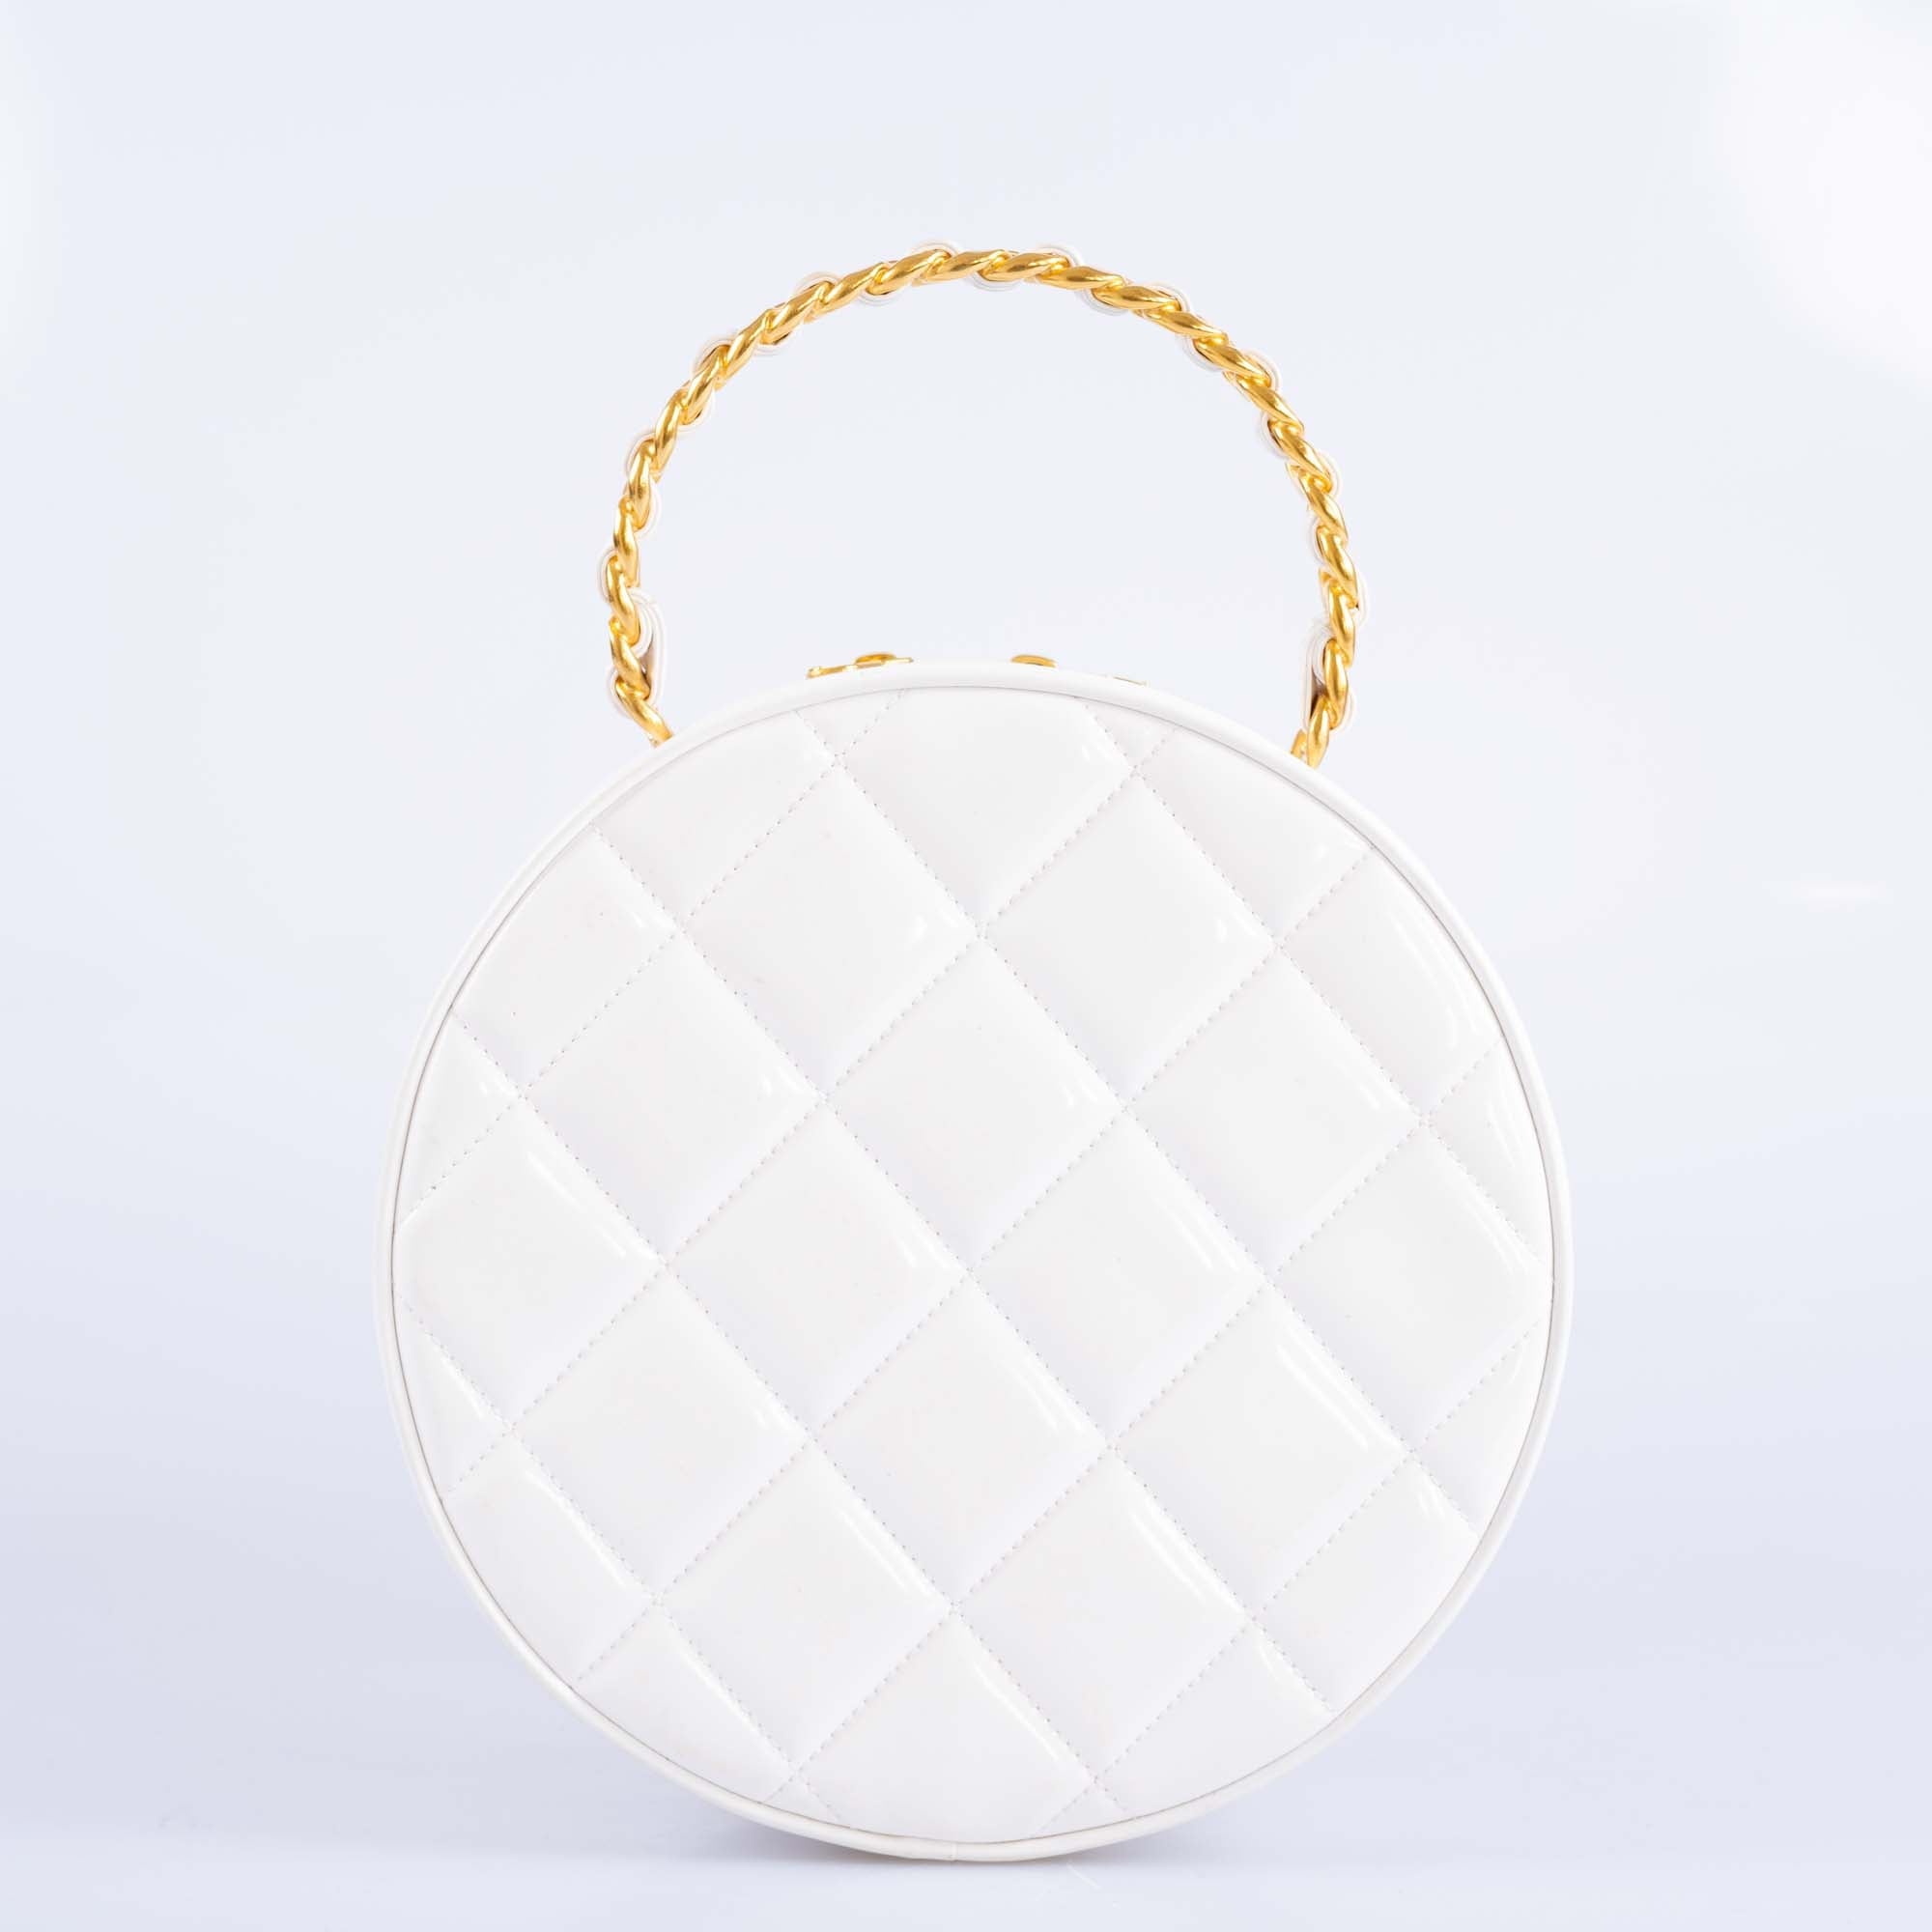 Chanel Round CC Vanity White and Black Patent Leather Gold Hardware